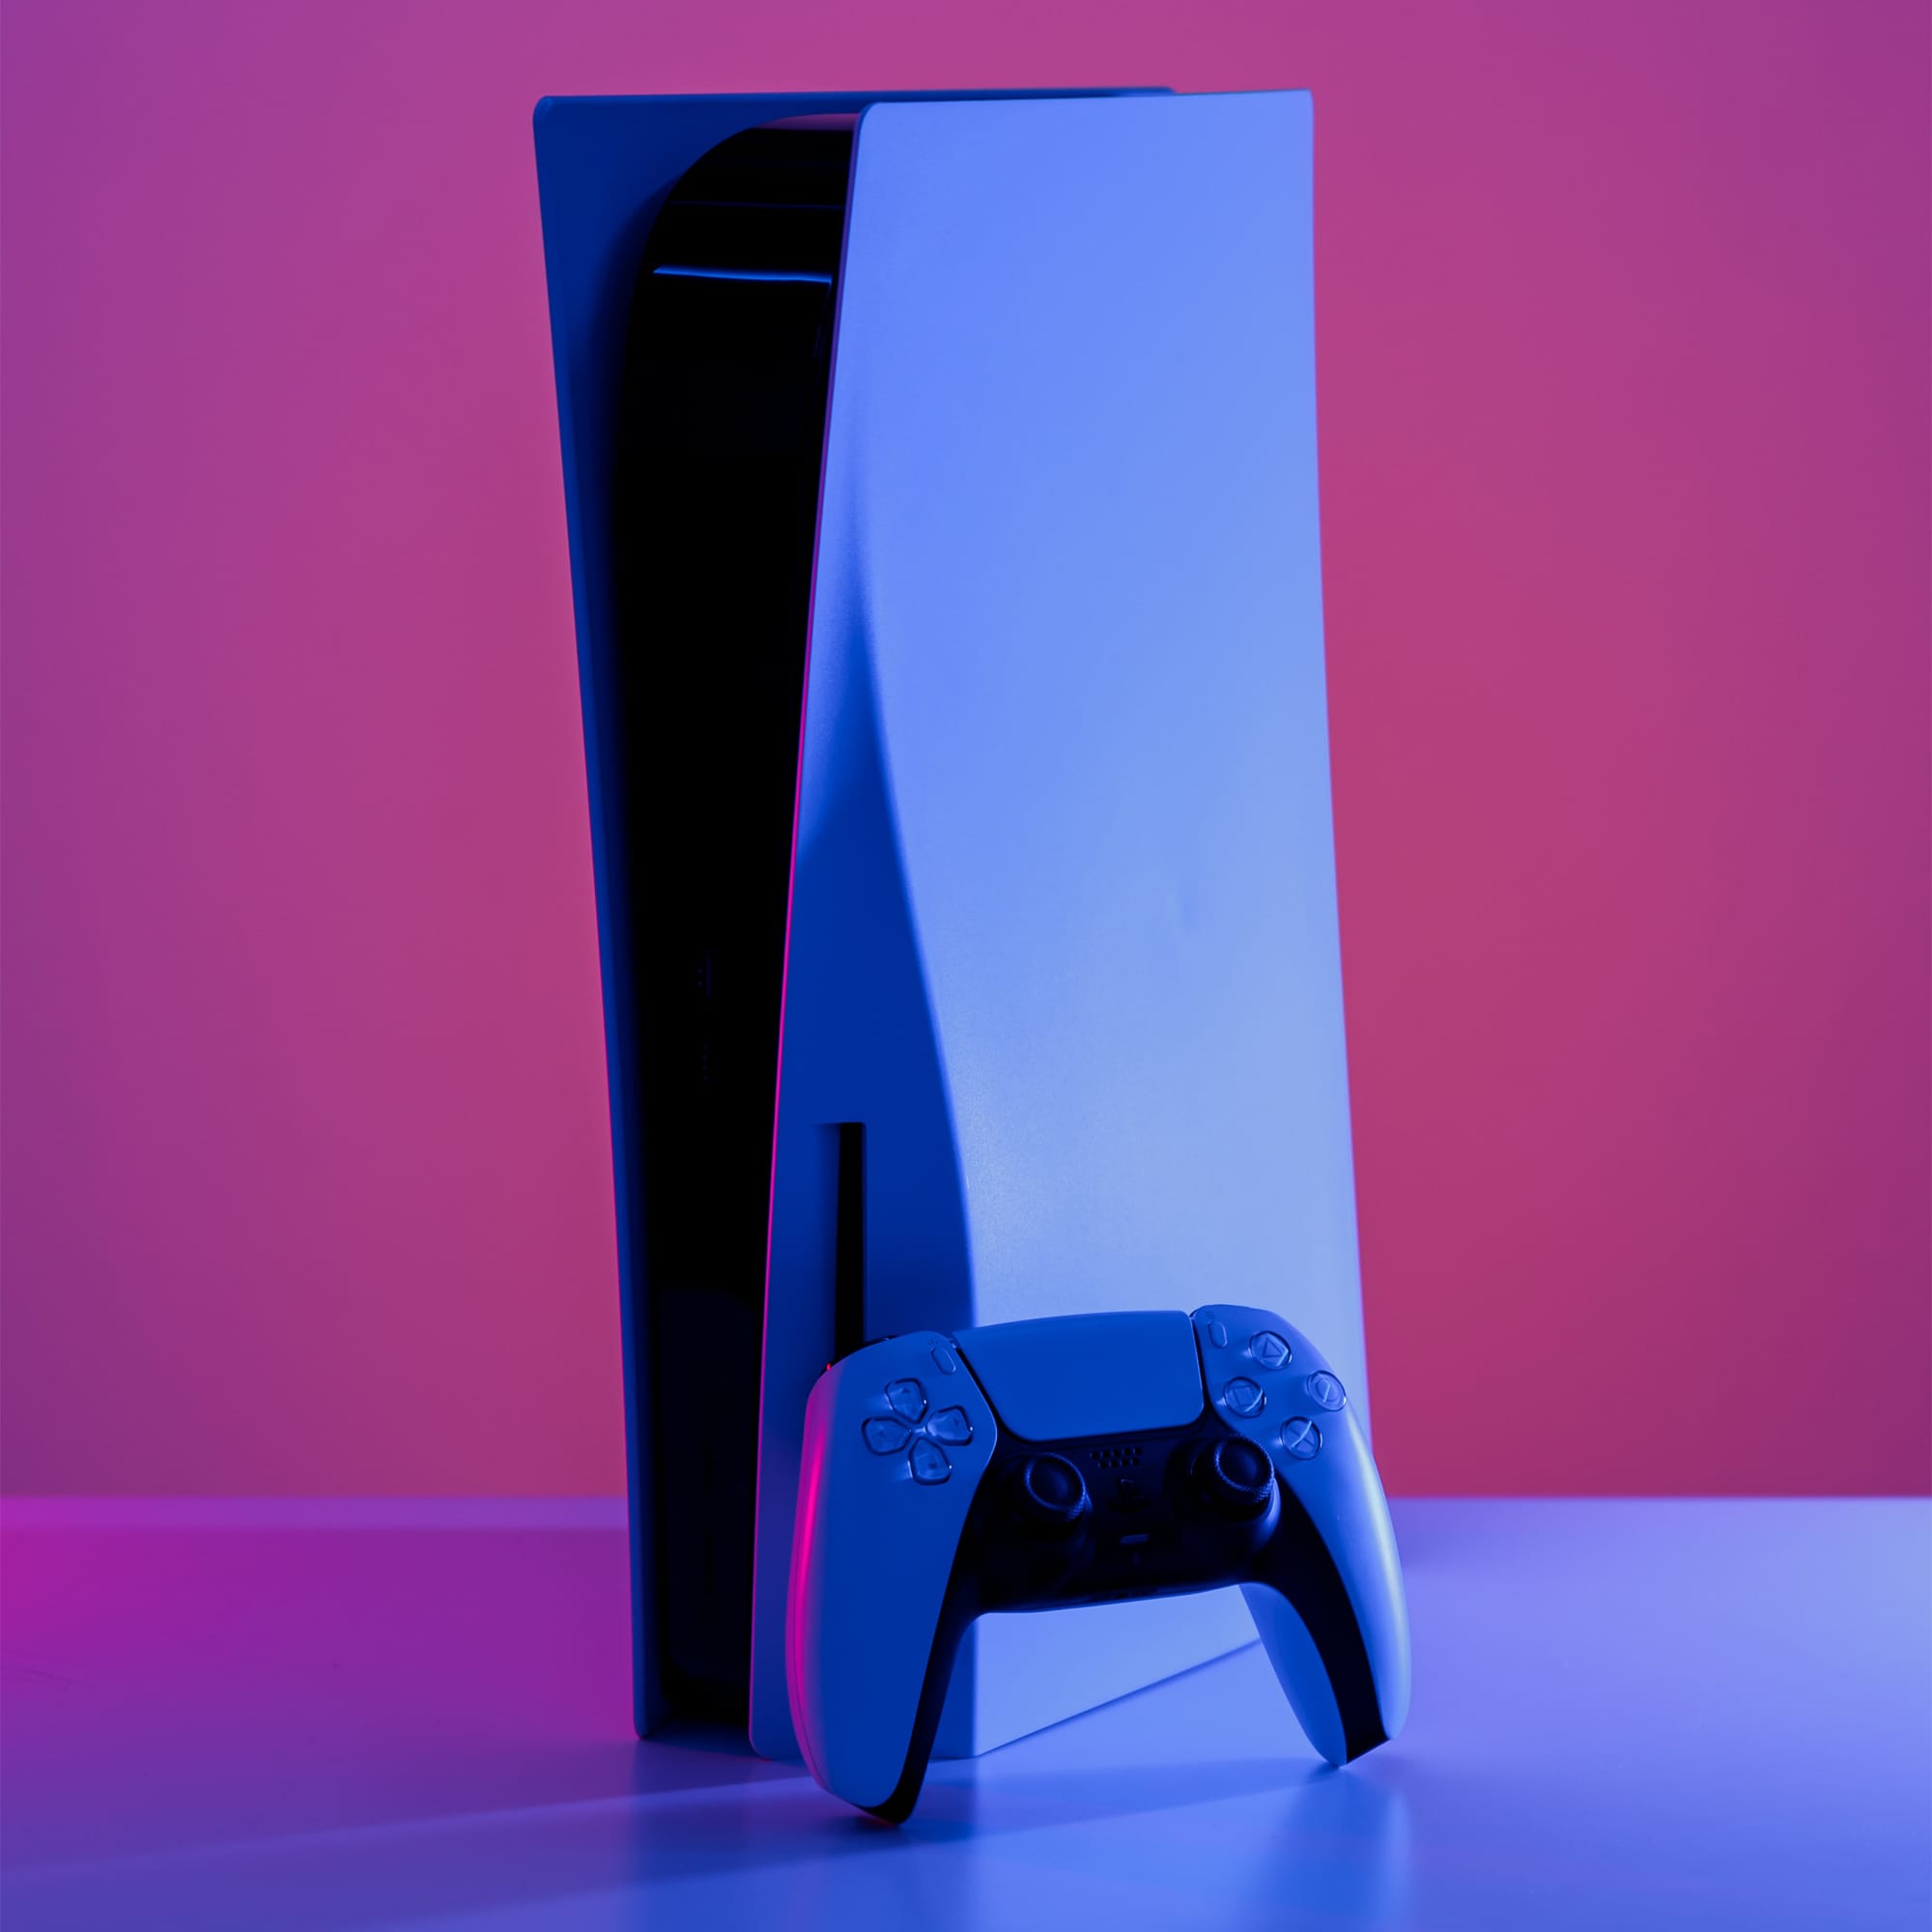 PS5 DualSense wireless controller resting upright against the standard edition PS5 console.